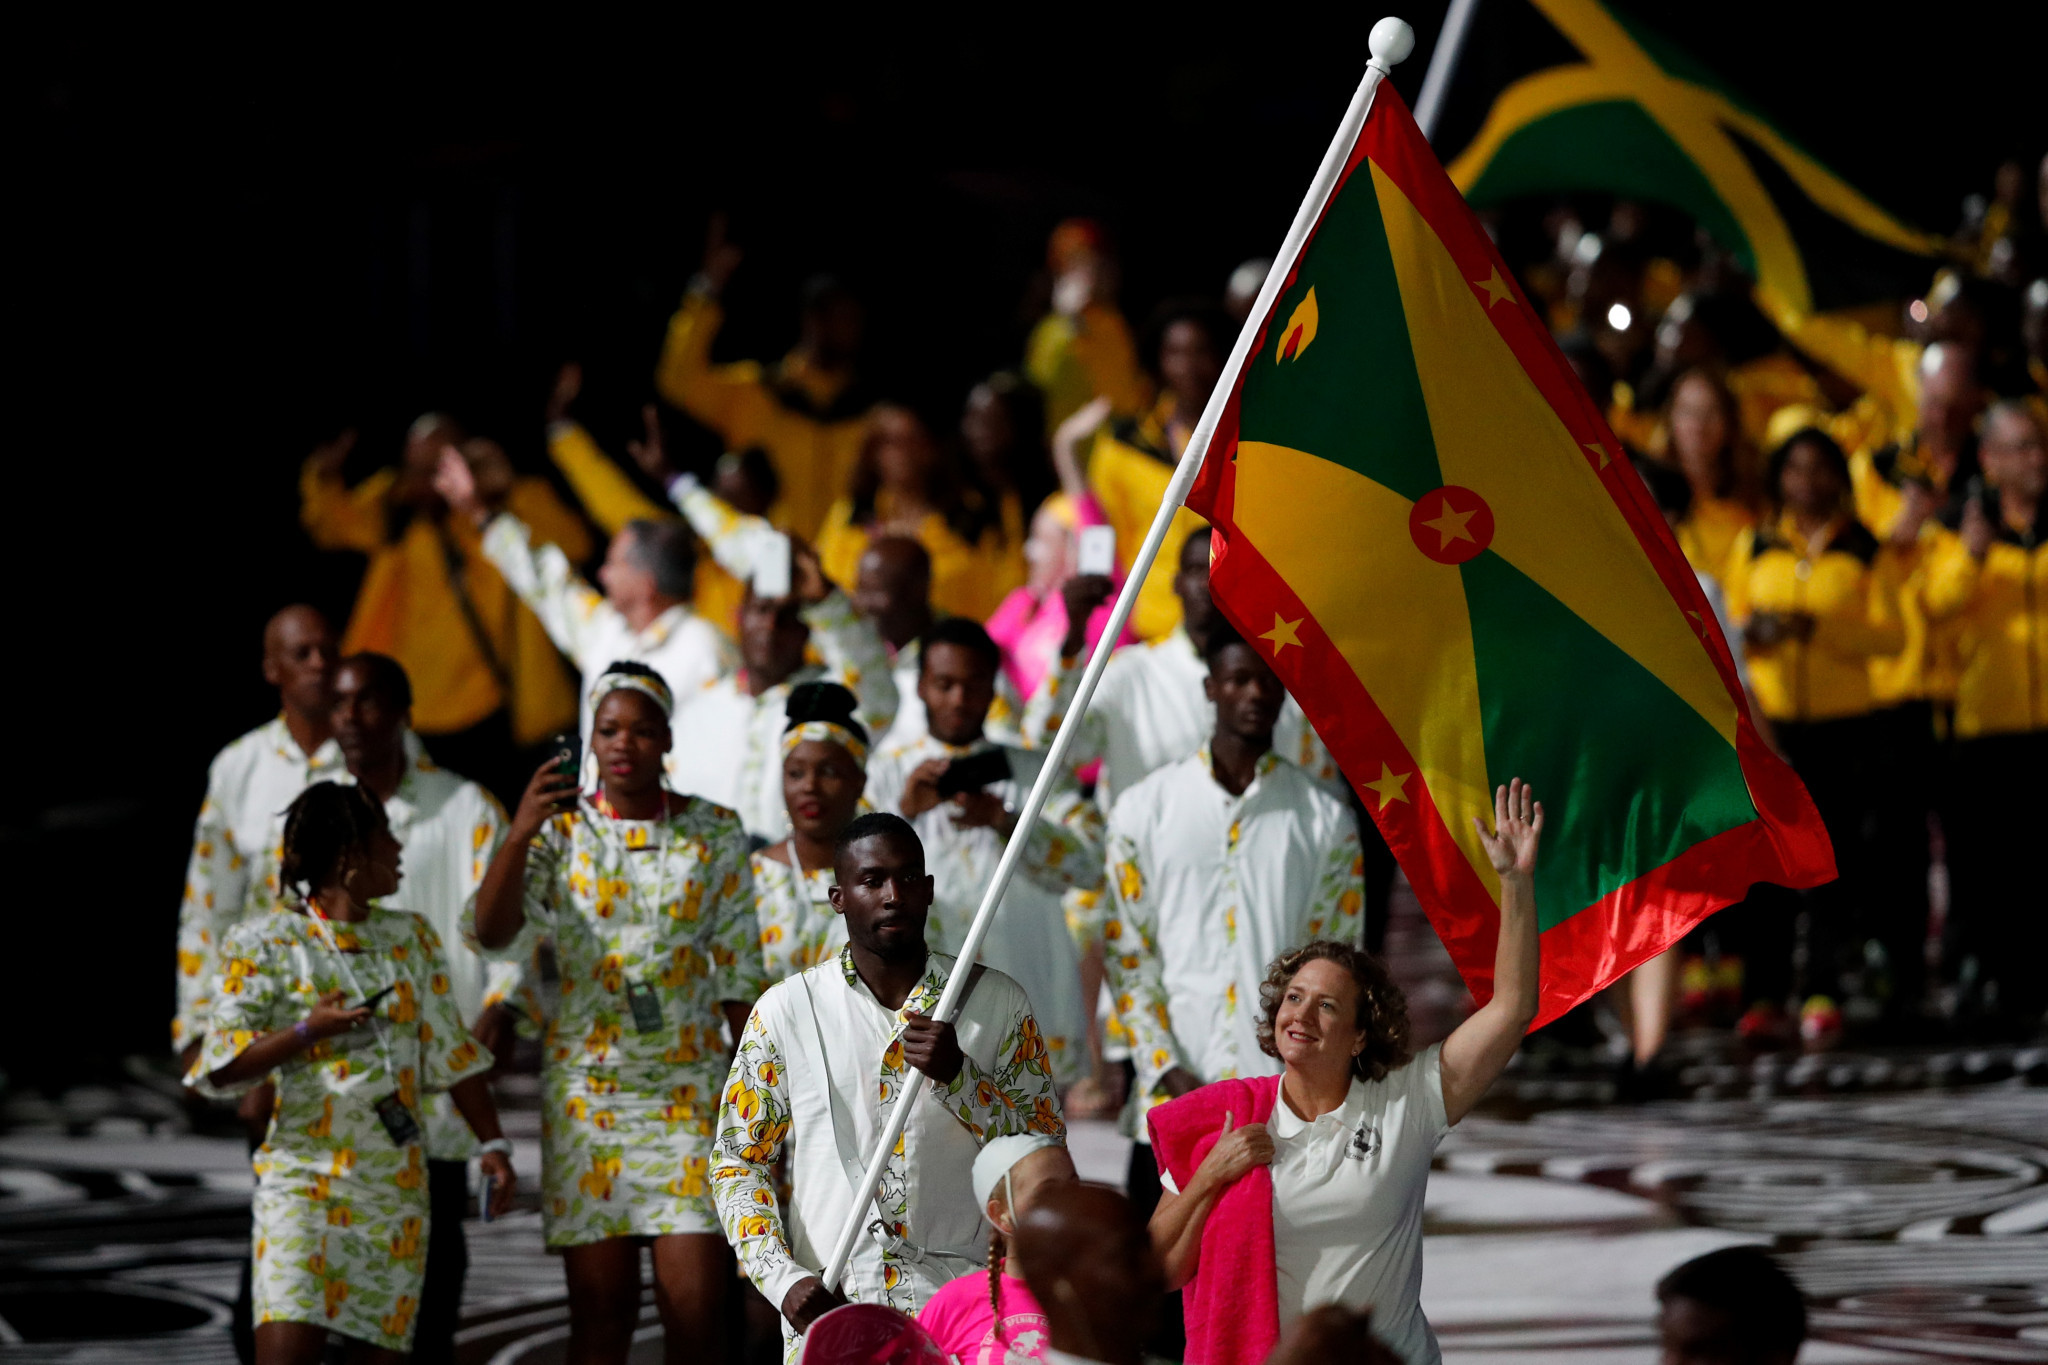 Grenada punches above its weight on the international sporting stage  ©Getty Images